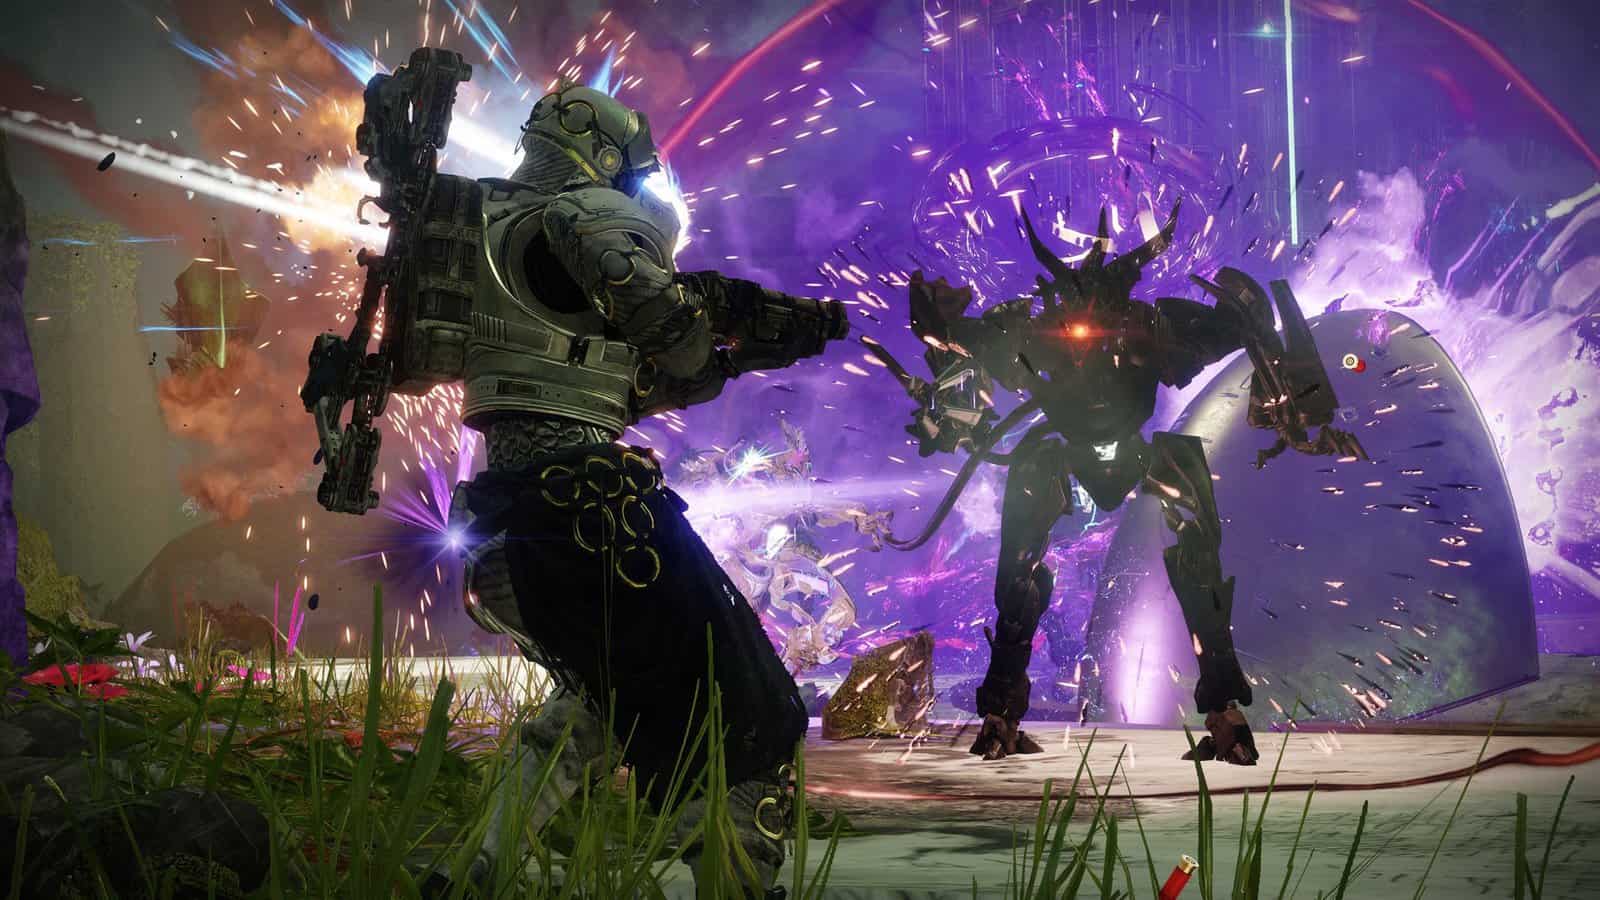 Barrier Champions Destiny 2 featured